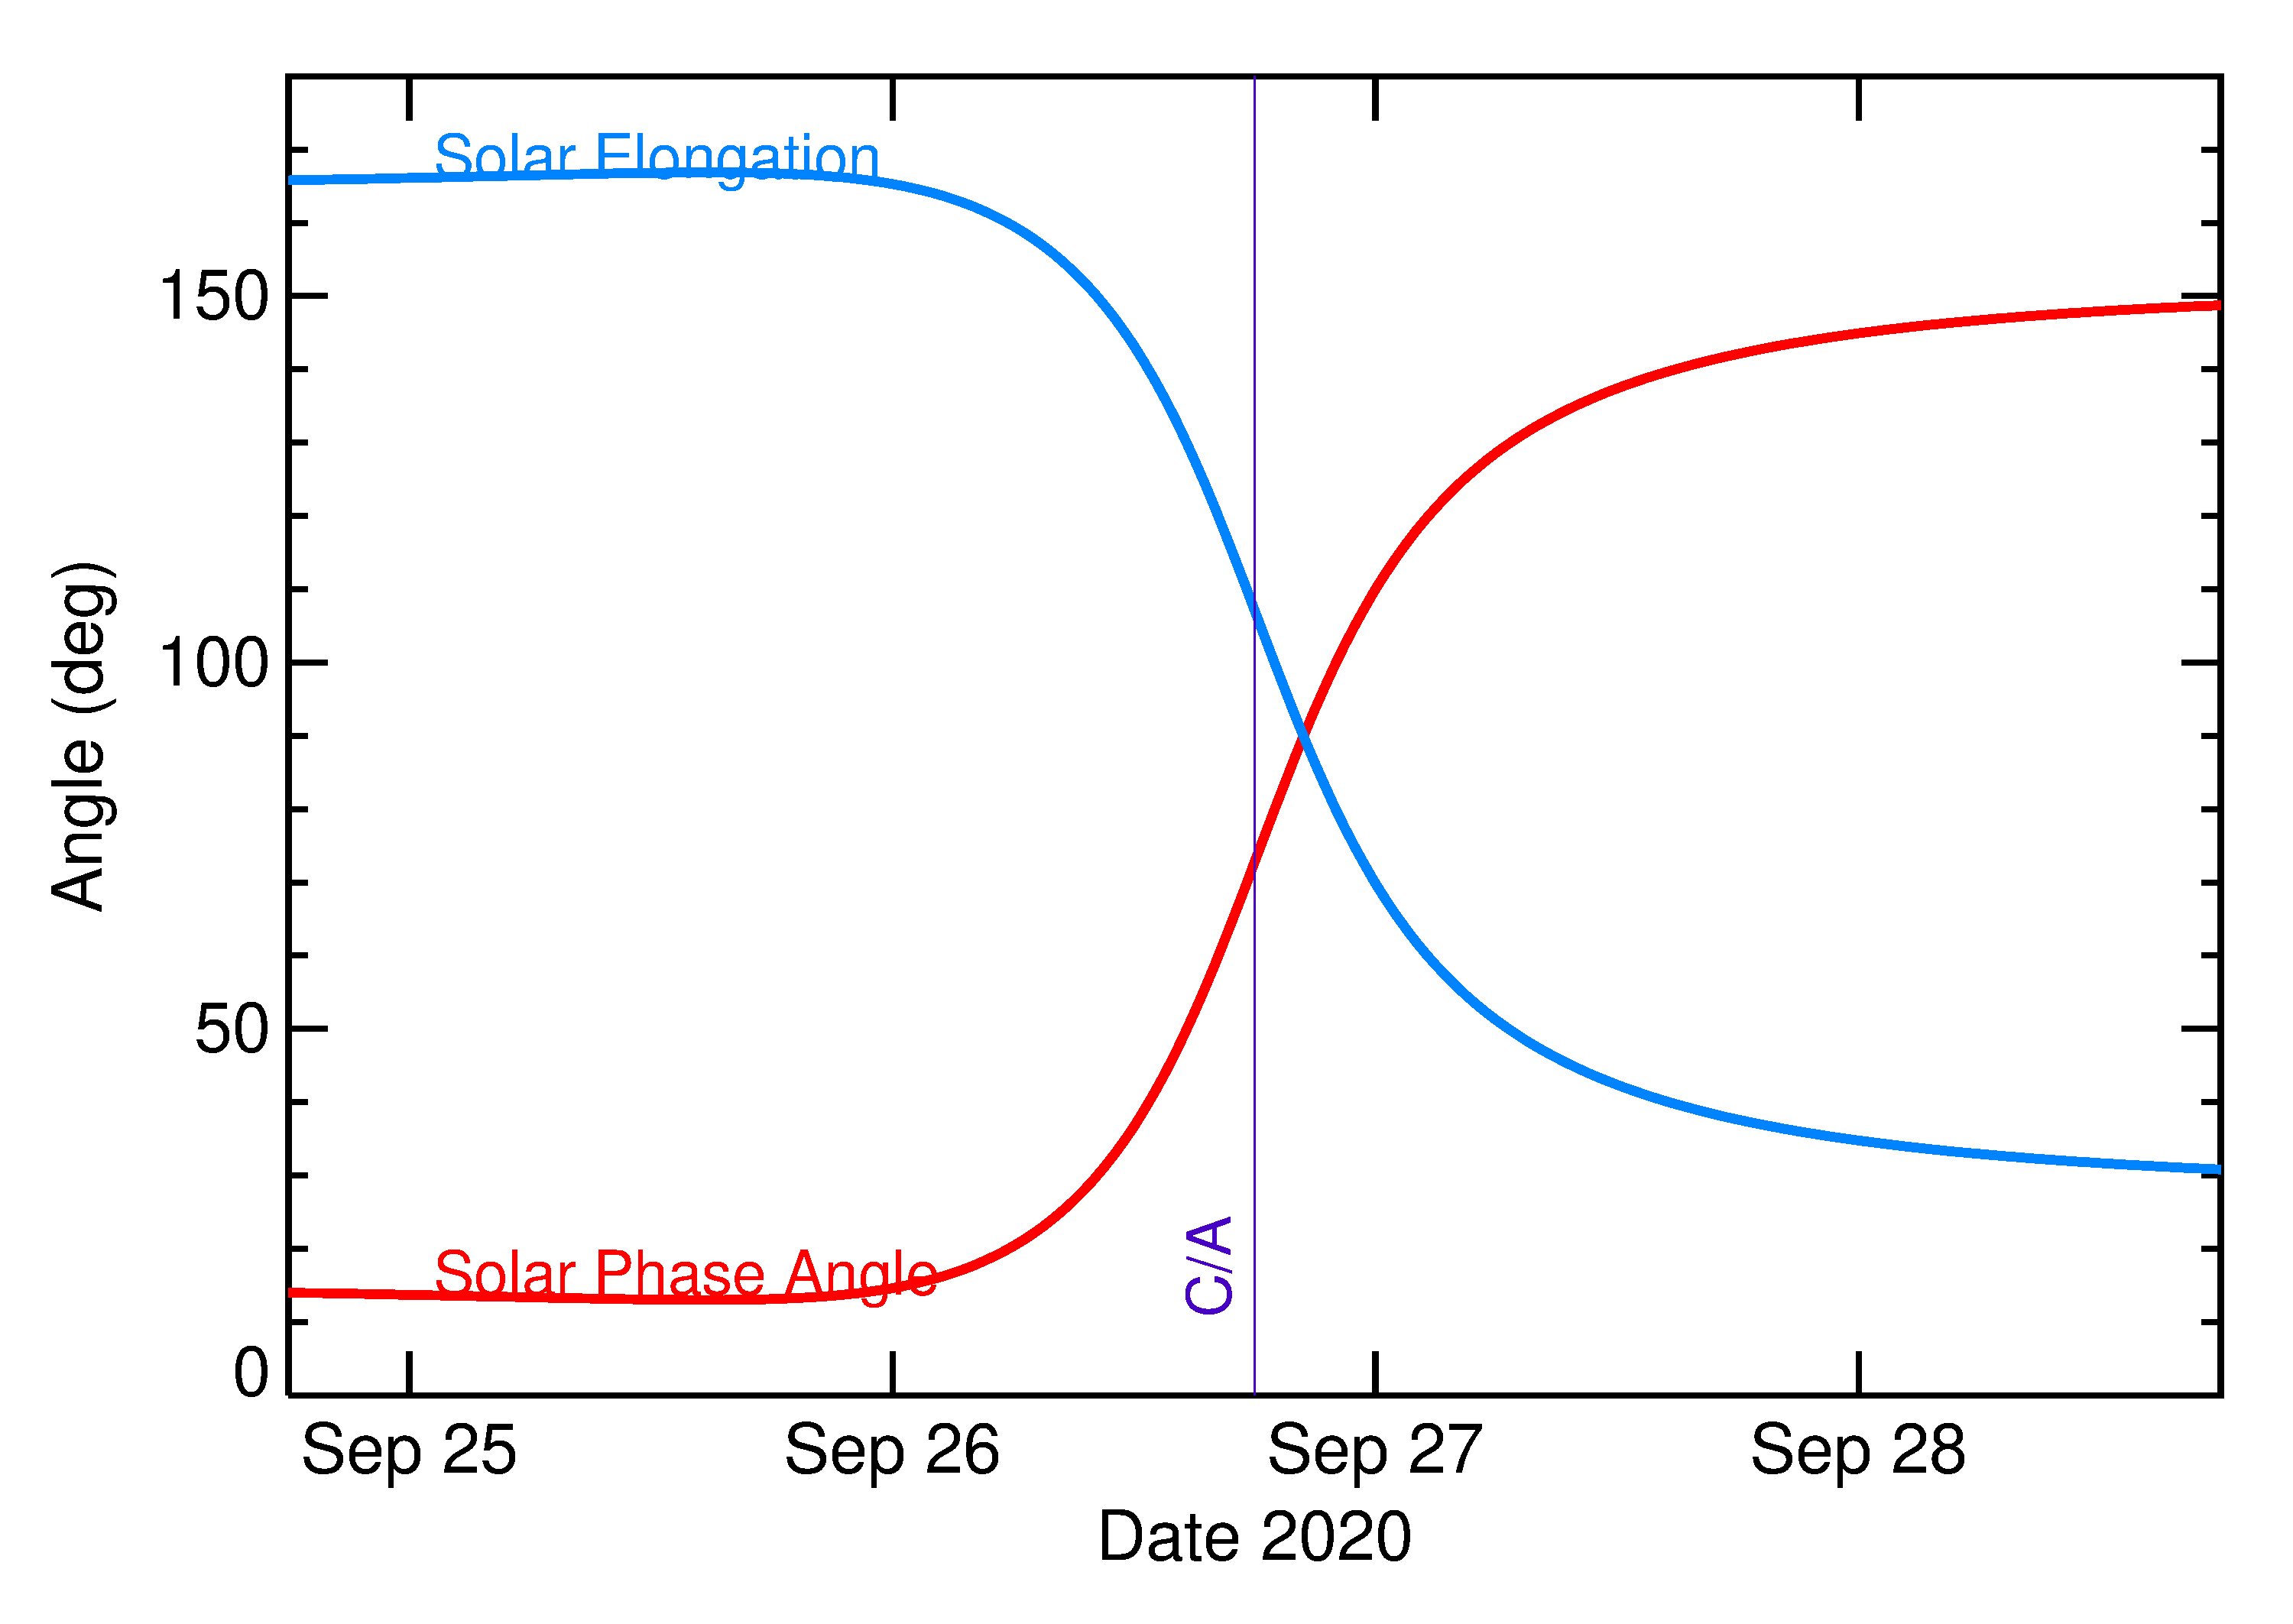 Solar Elongation and Solar Phase Angle of 2020 SQ4 in the days around closest approach